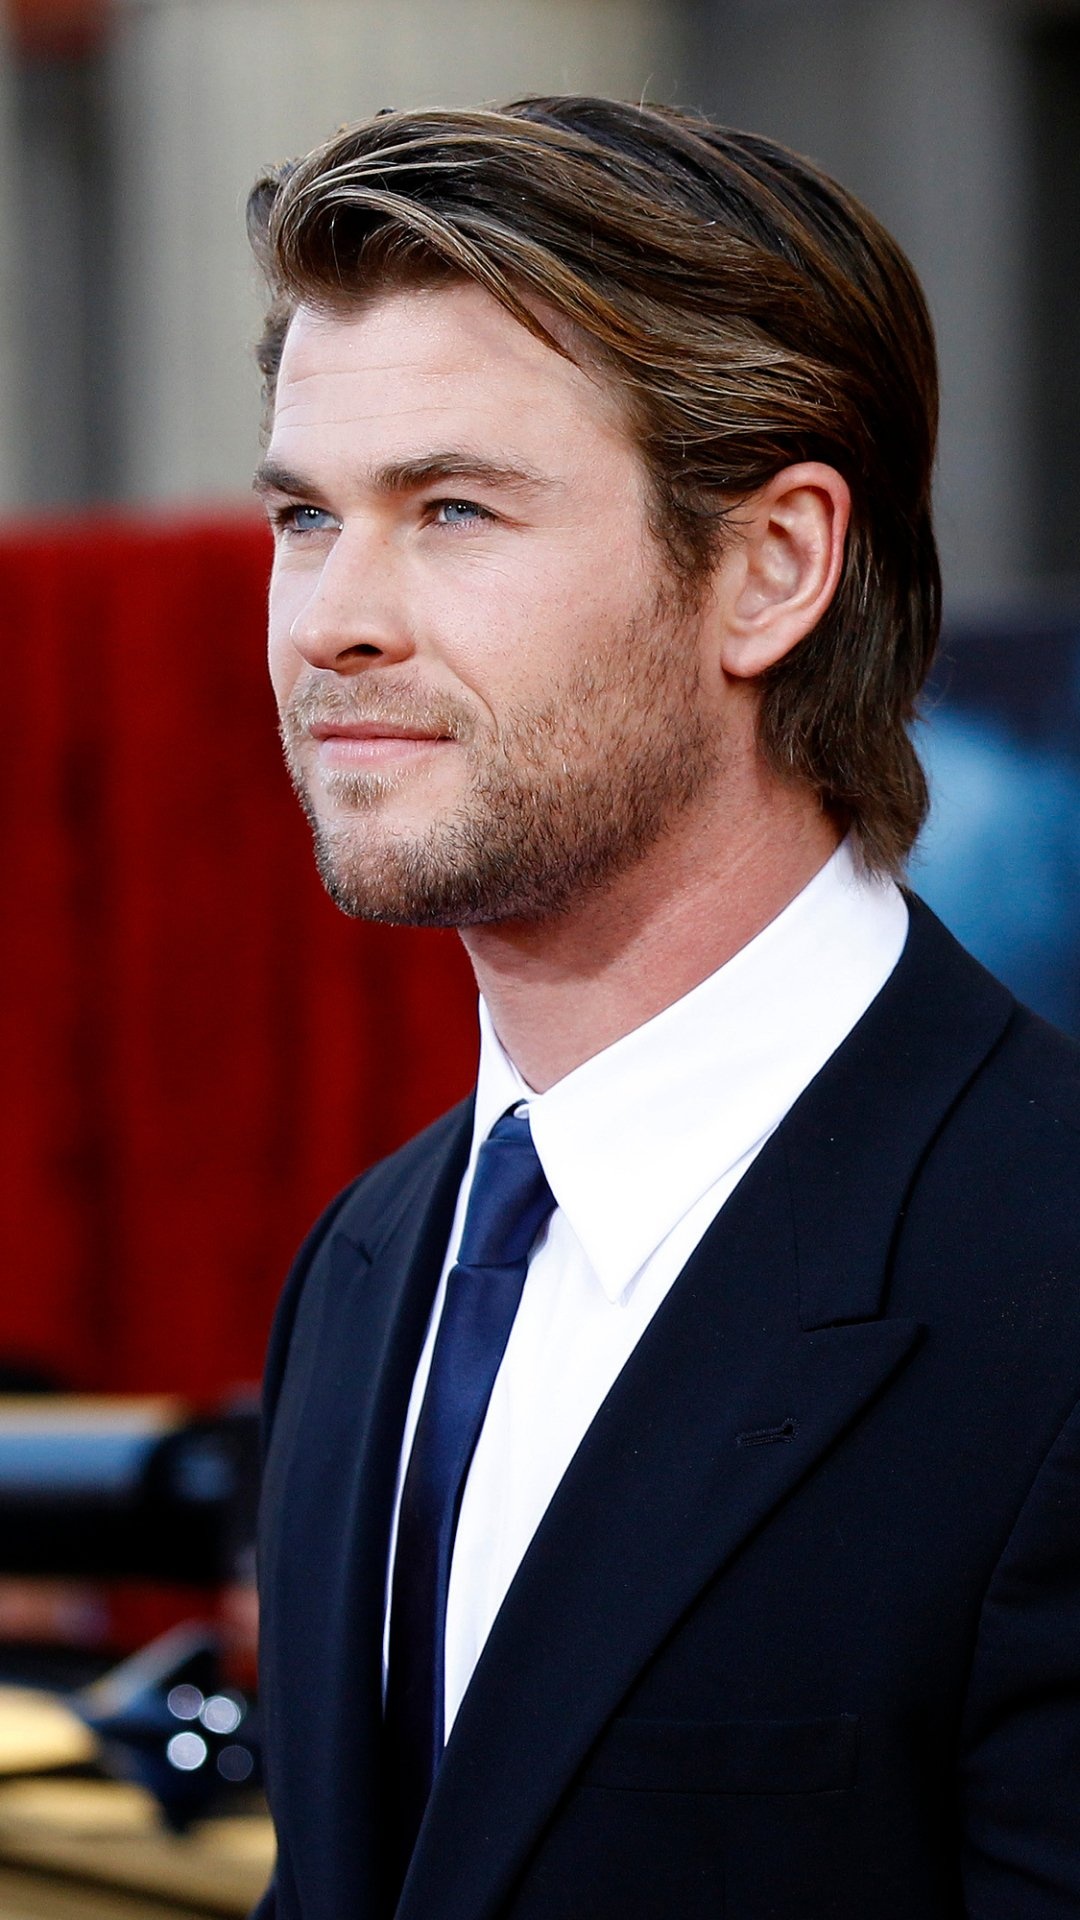 Chris Hemsworth: Appointed a Member of the Order of Australia in the 2021 Queen's Birthday Honors. 1080x1920 Full HD Wallpaper.